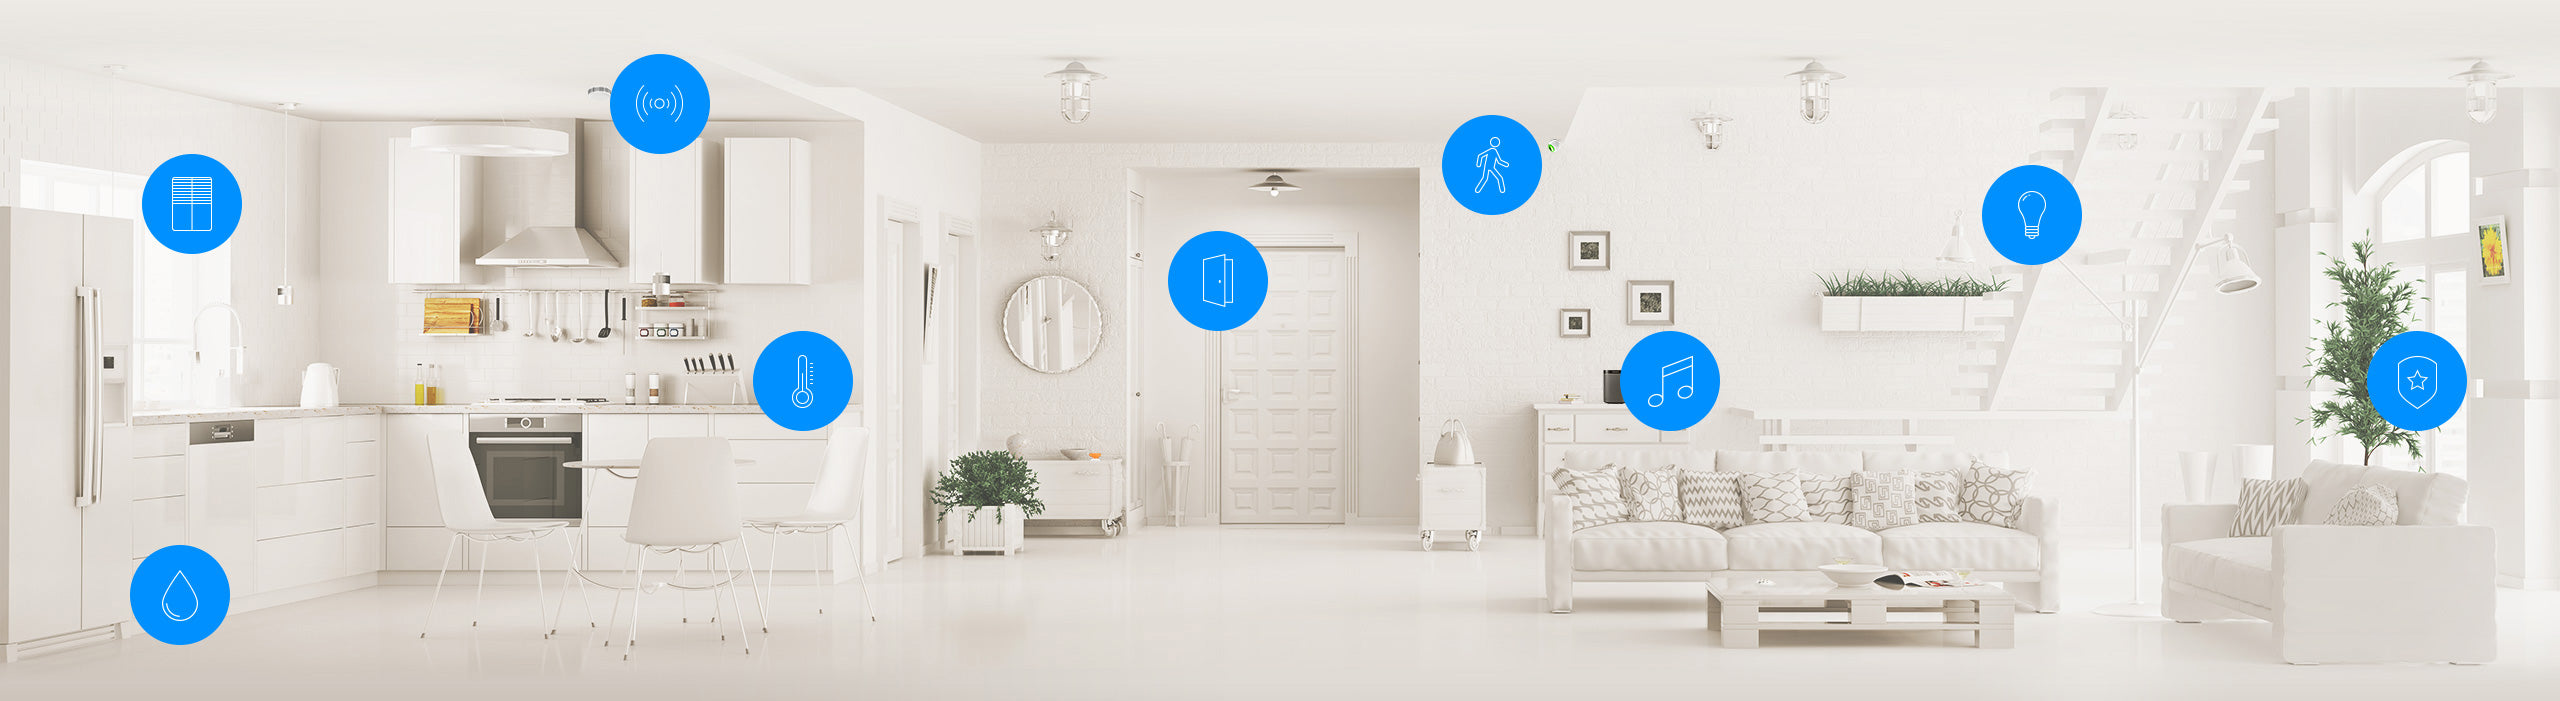 An image of an open plan living area finished in a minimalist, neutral style with various blue circular icons to represent home automation components.